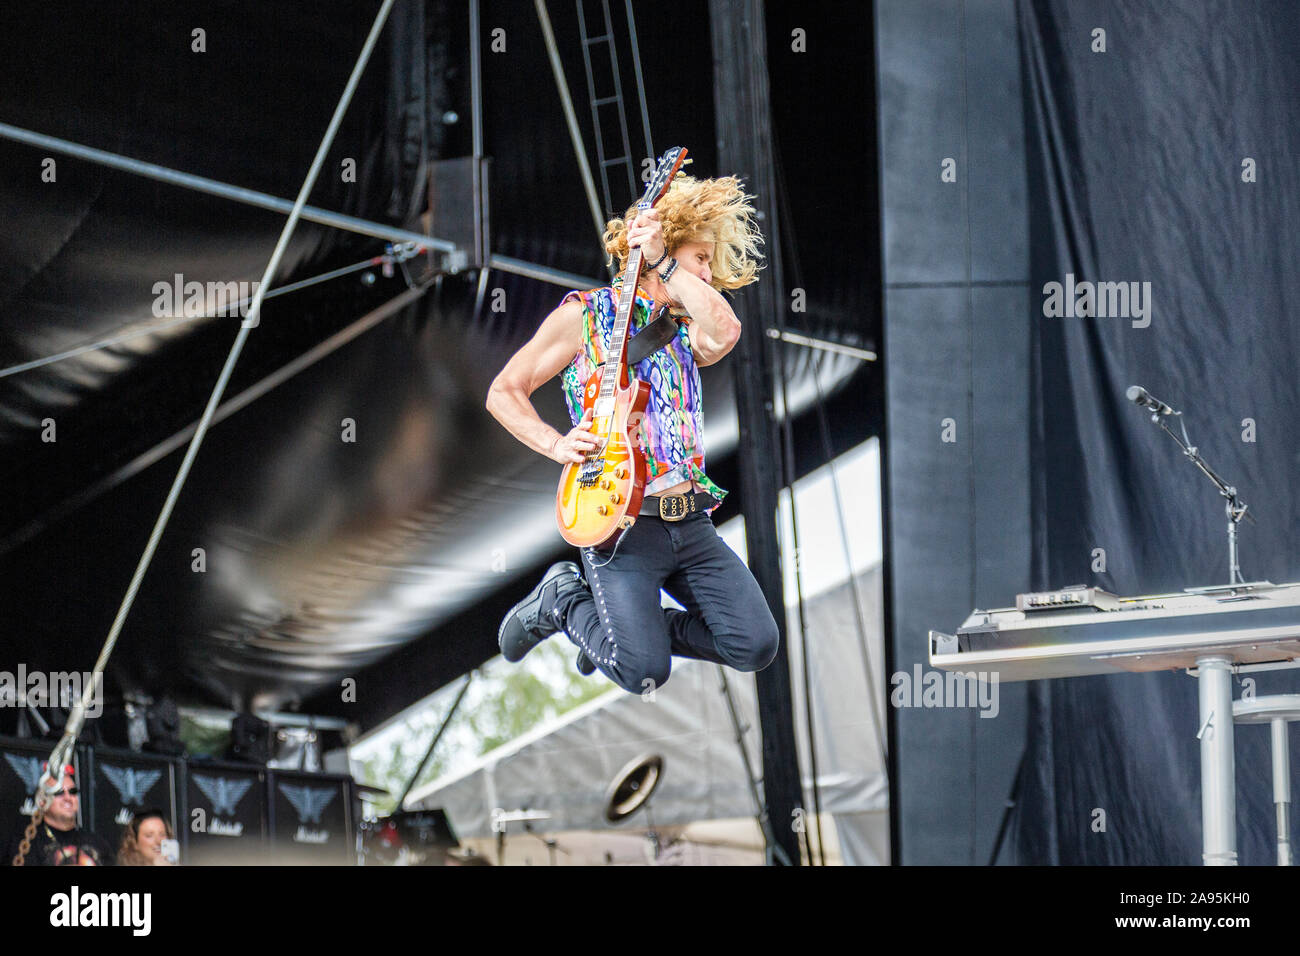 Solvesborg, Sweden. 08th, June 2019. The American rock band Styx performs a live concert during the Swedish music festival Sweden Rock Festival 2019. Here guitarist Tommy Shaw is seen live on stage. (Photo credit: Gonzales Photo - Terje Dokken). Stock Photo